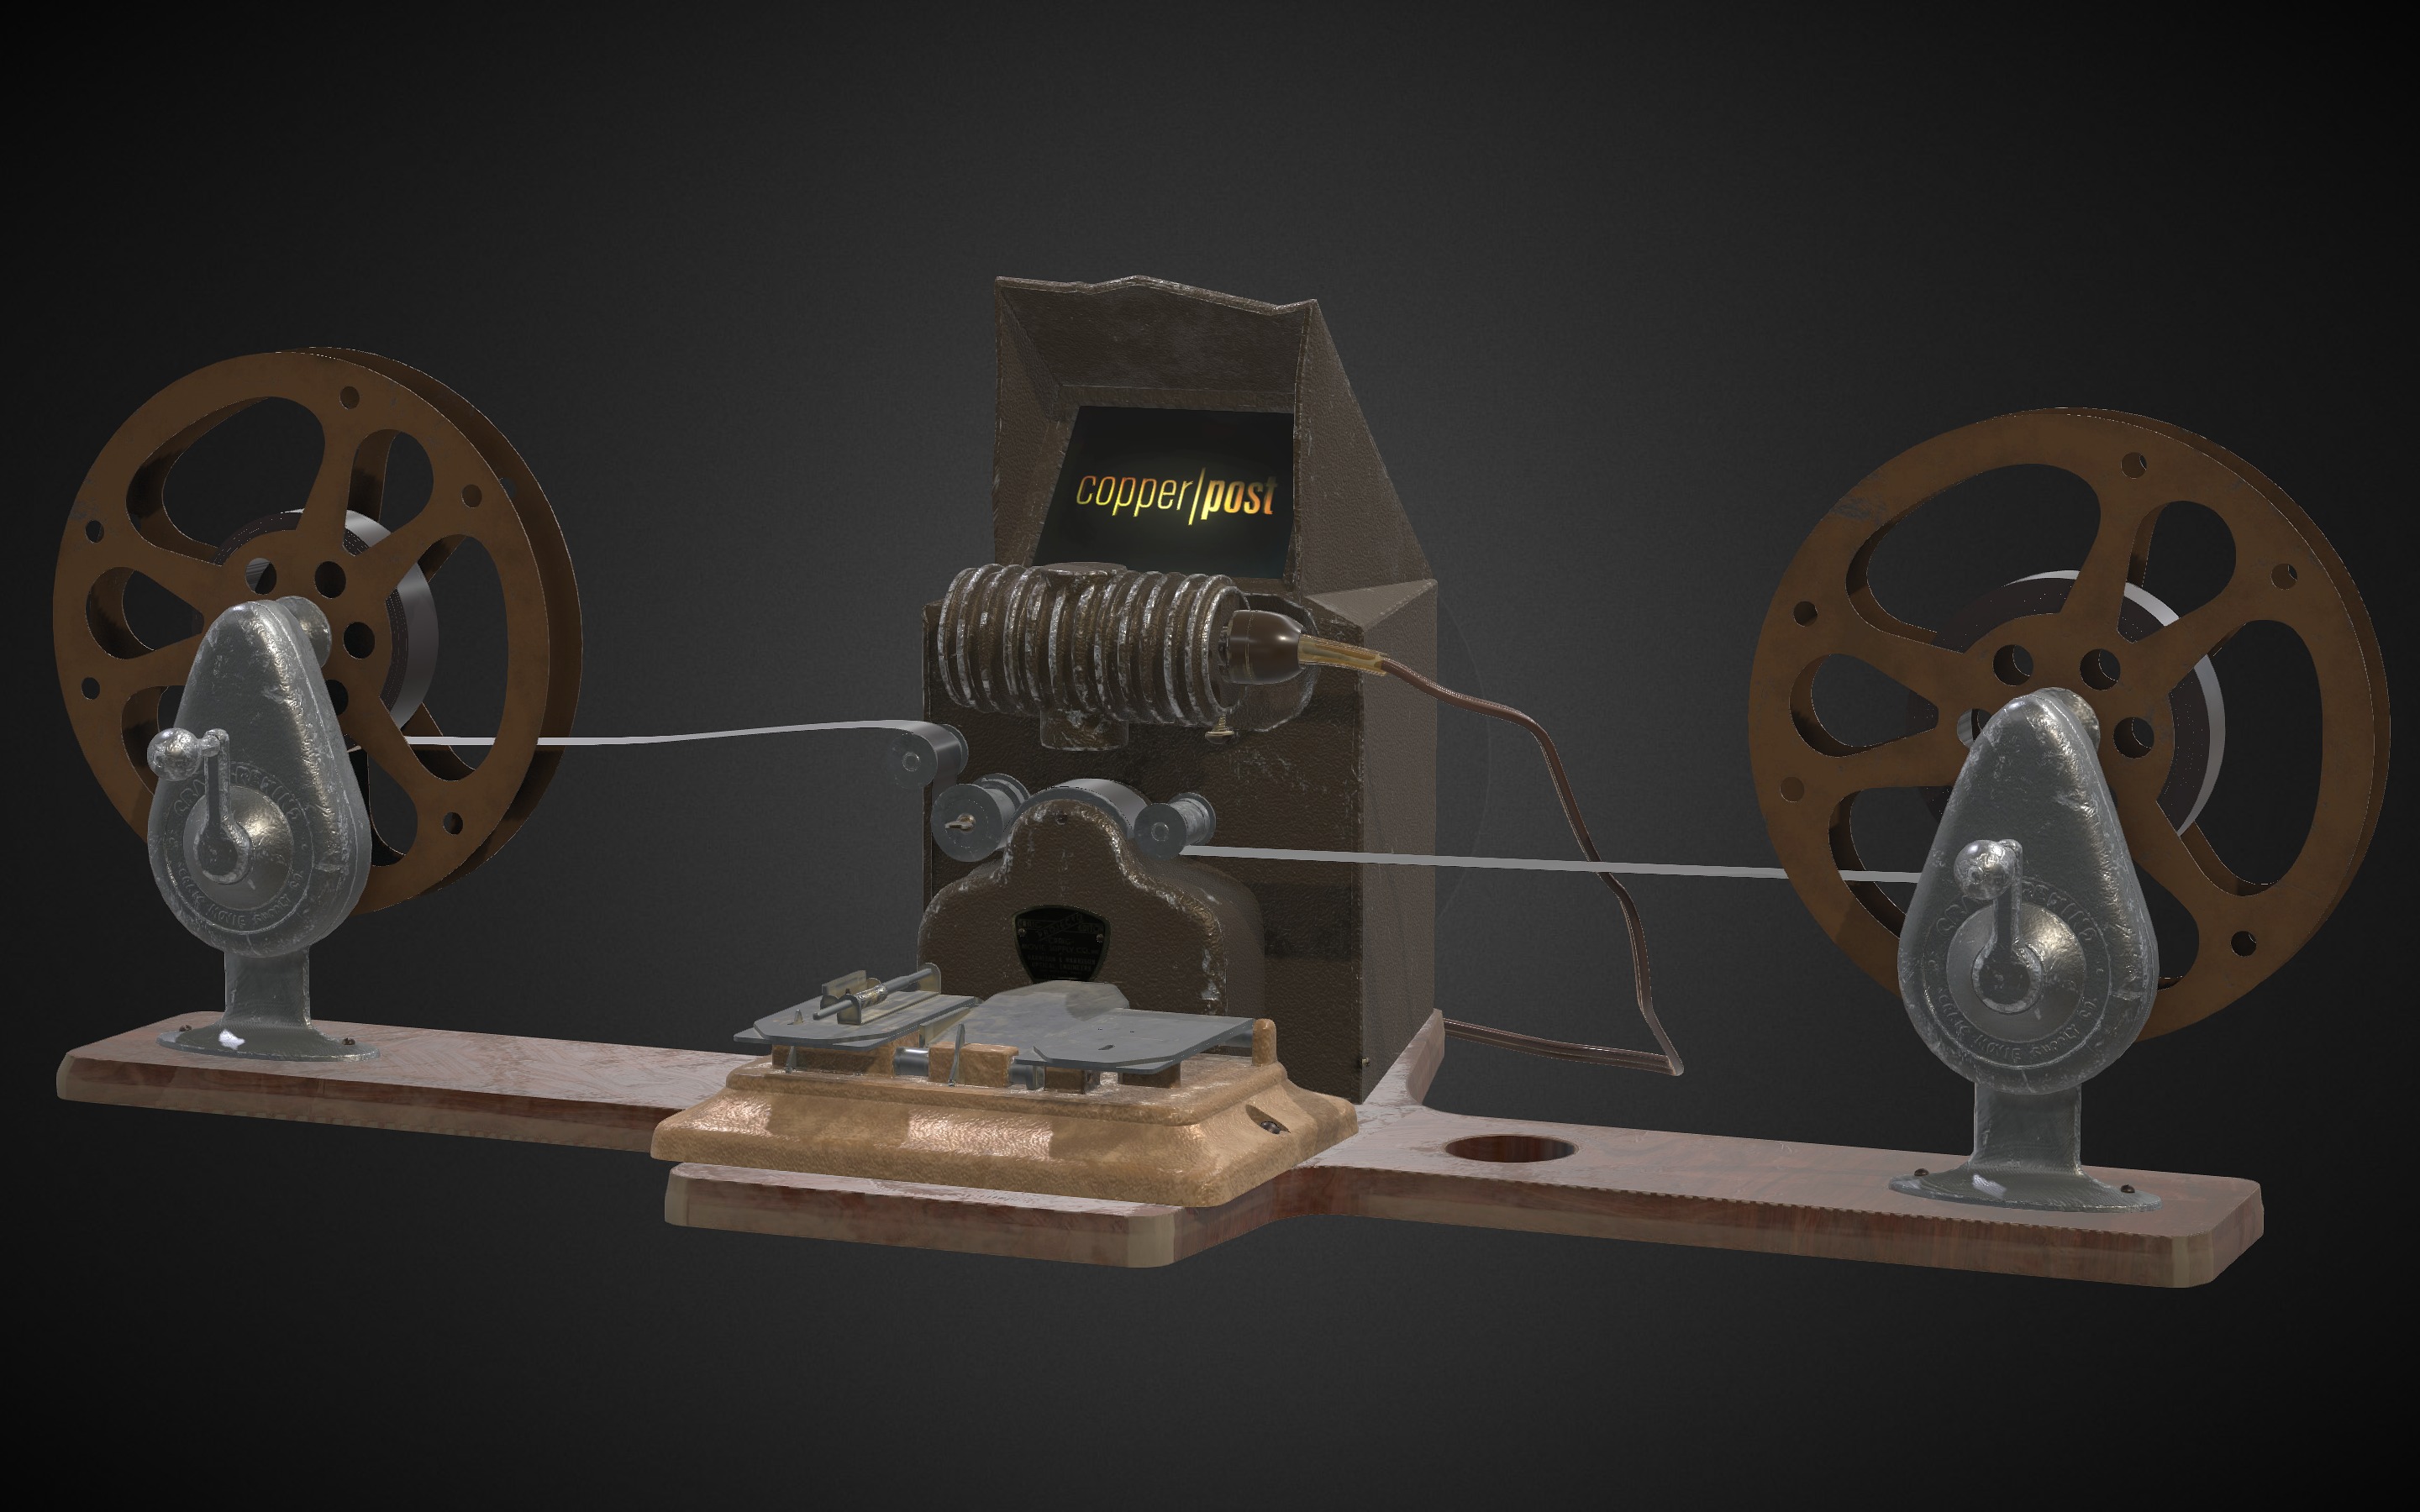 The Craig ProjectO Editor by Craig Movie Supply CO.  We have one of these bad boys collecting dust in our studio.  Since we do a lot of post, there is always something a little fun about making an old school device in a digital medium. Thanks for viewing! Check out more of our work at the link below.
http://www.copperpost.com - Craig ProjectO Editor - Download Free 3D model by JJ Chalupnik (@jjchalupnik) 3d model